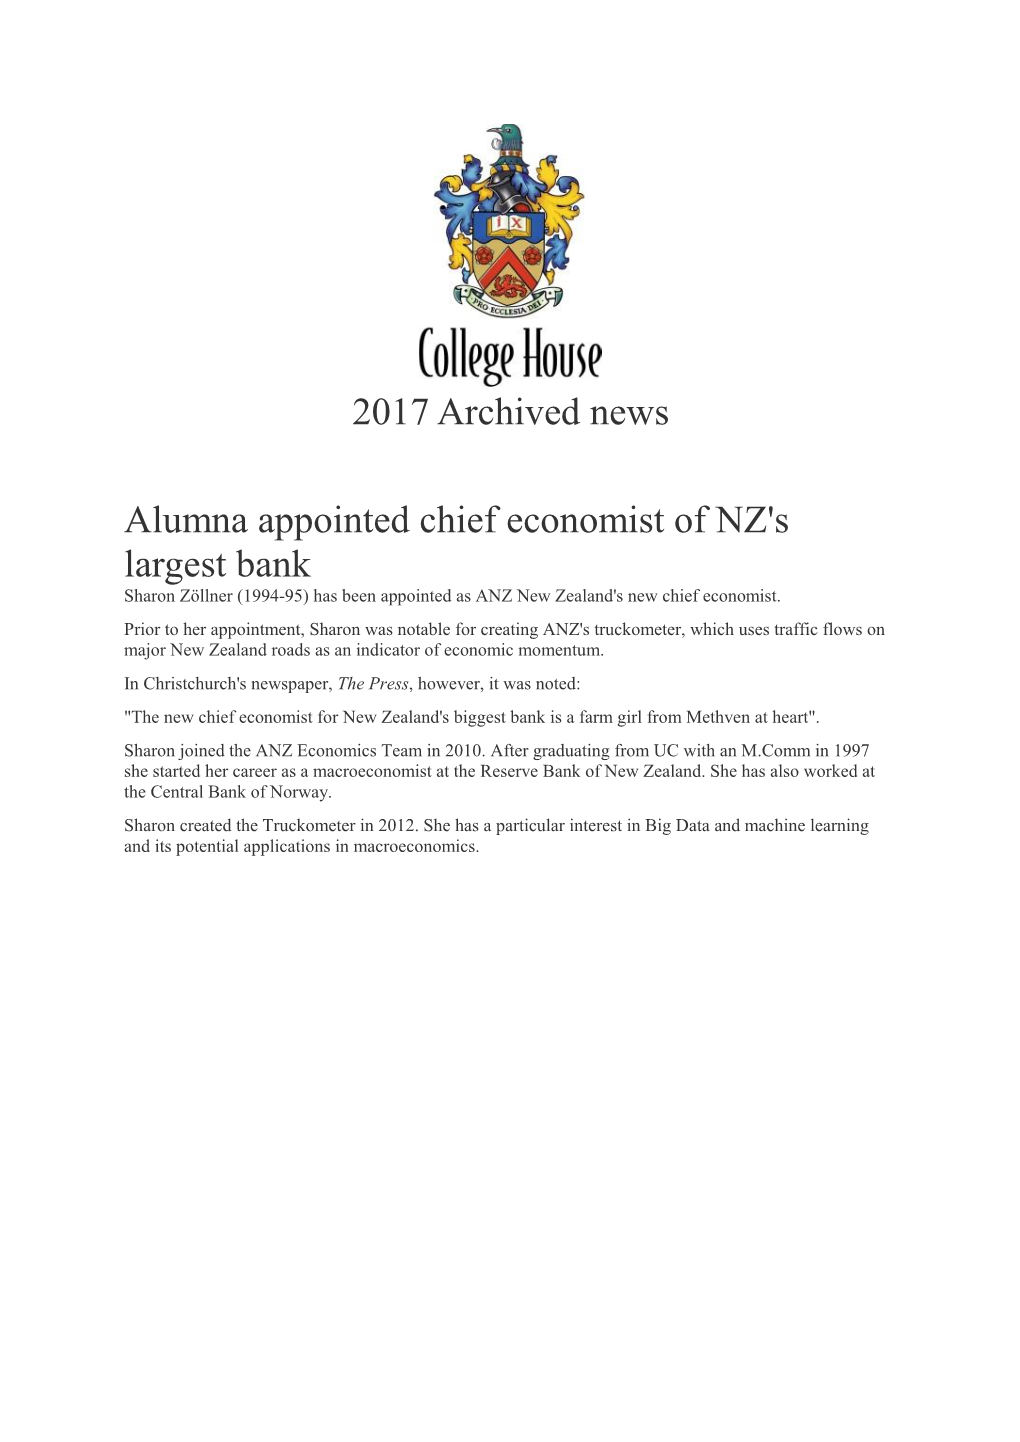 2017 Archived News Alumna Appointed Chief Economist of NZ's